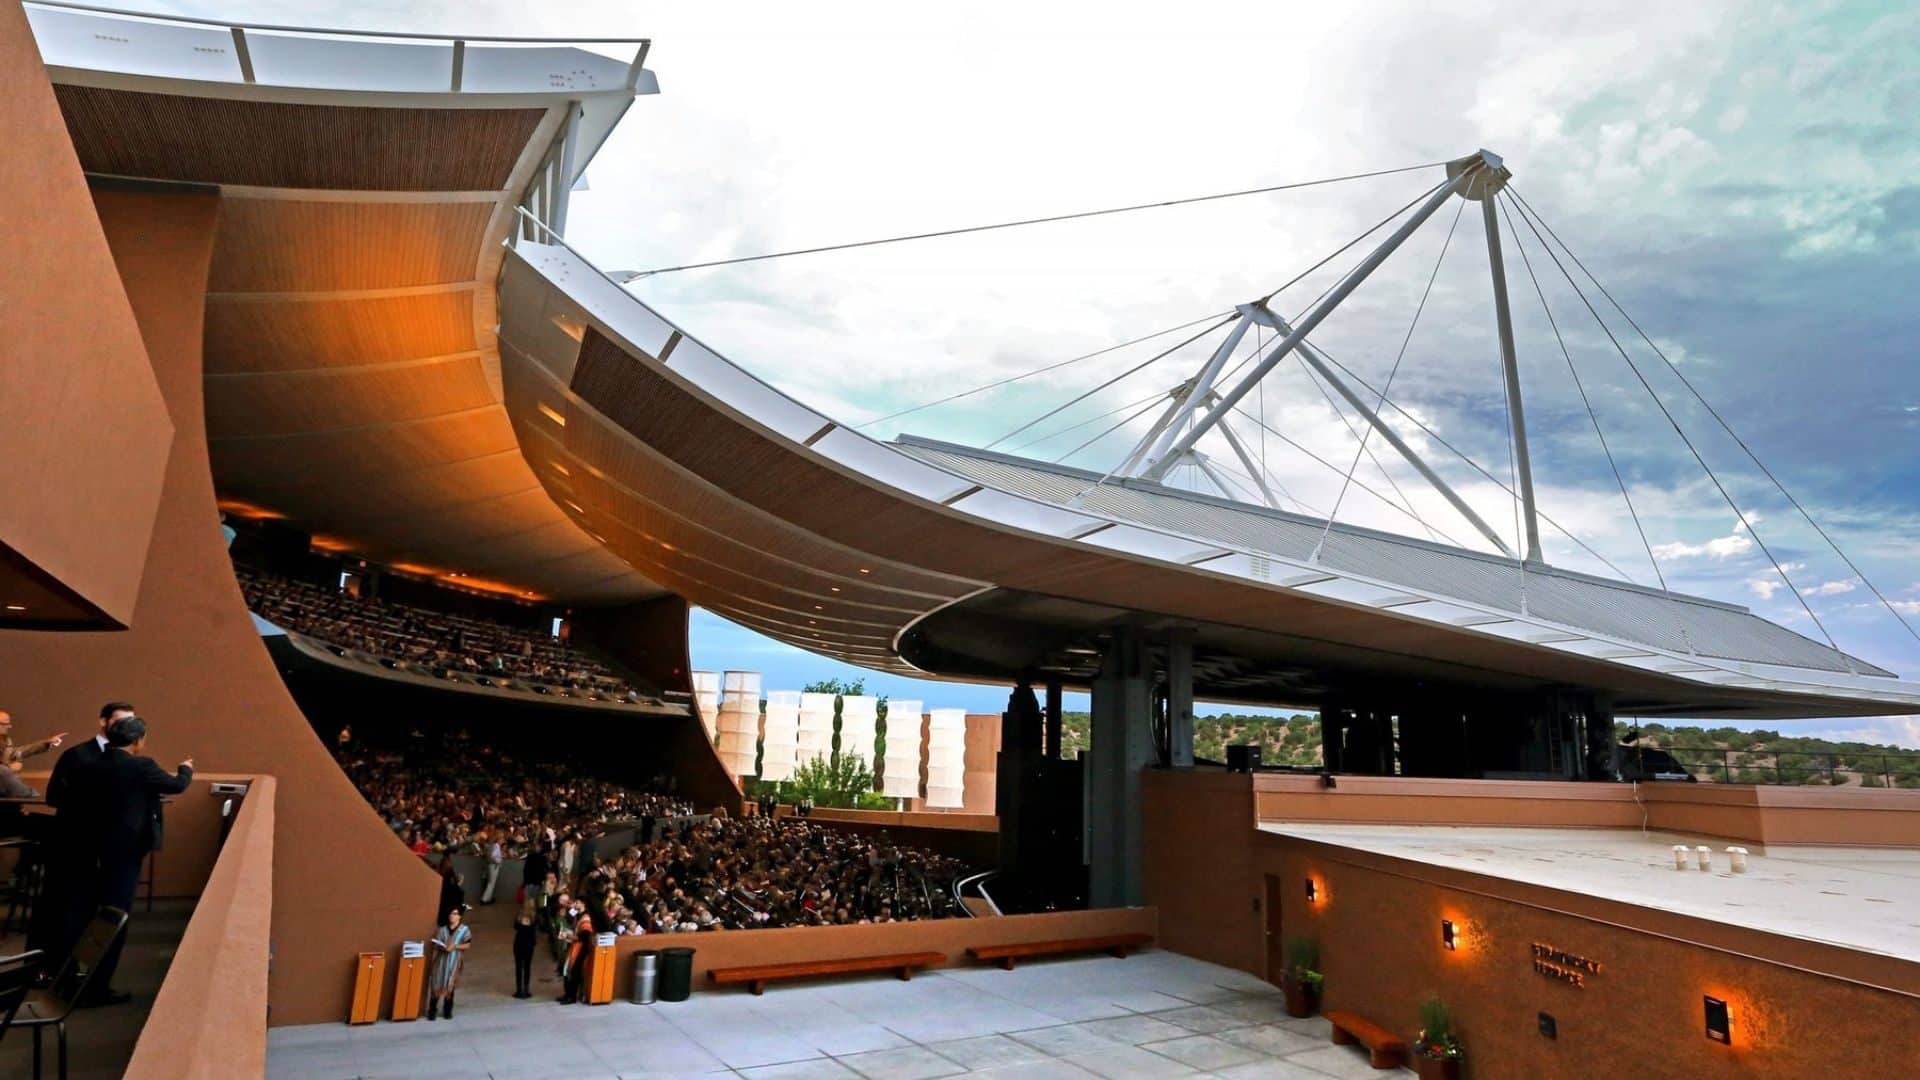 Close-up view of the unique Santa Fe Opera building with curved and sloping ceiling. Photo by Robert Godwin